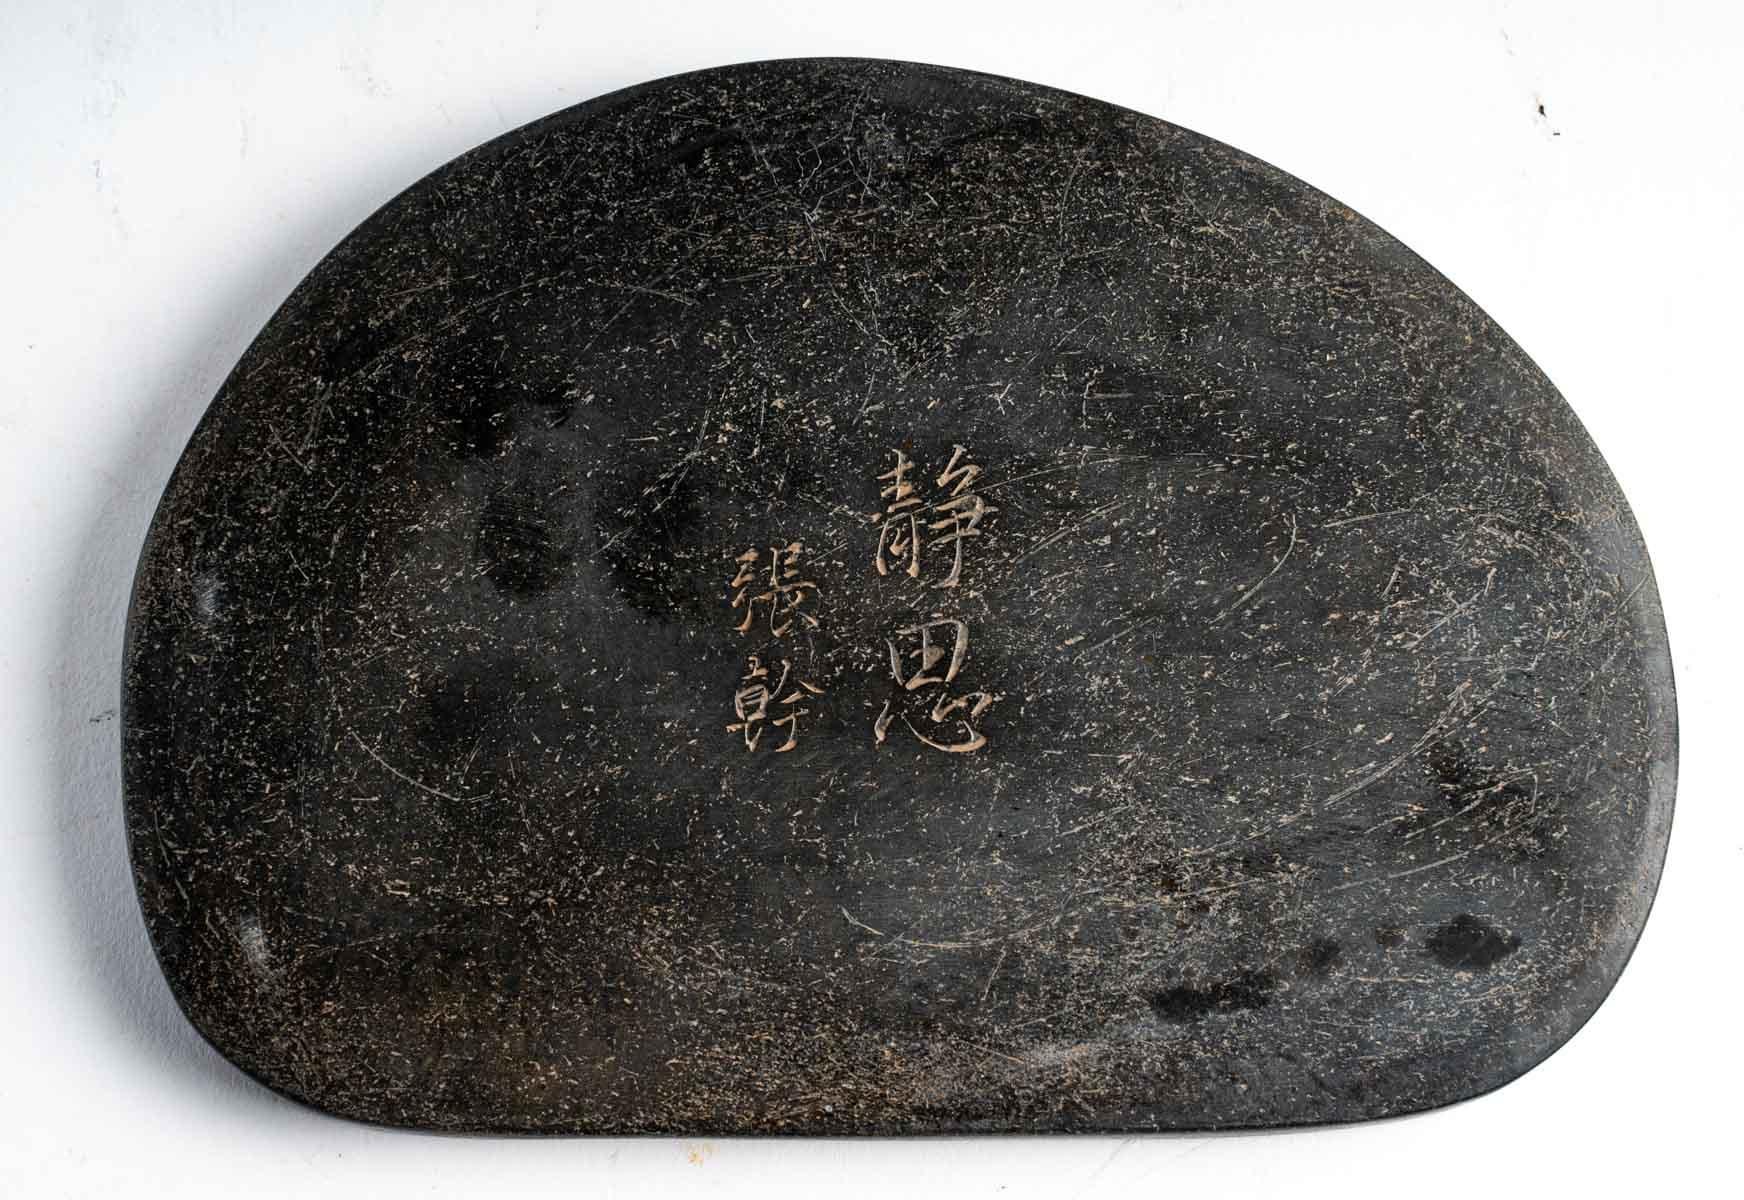 Inkstone with a house under a pine tree, China, 20th century.
Measures: H: 2 cm, W: 20.5 cm, D: 14.2 cm.